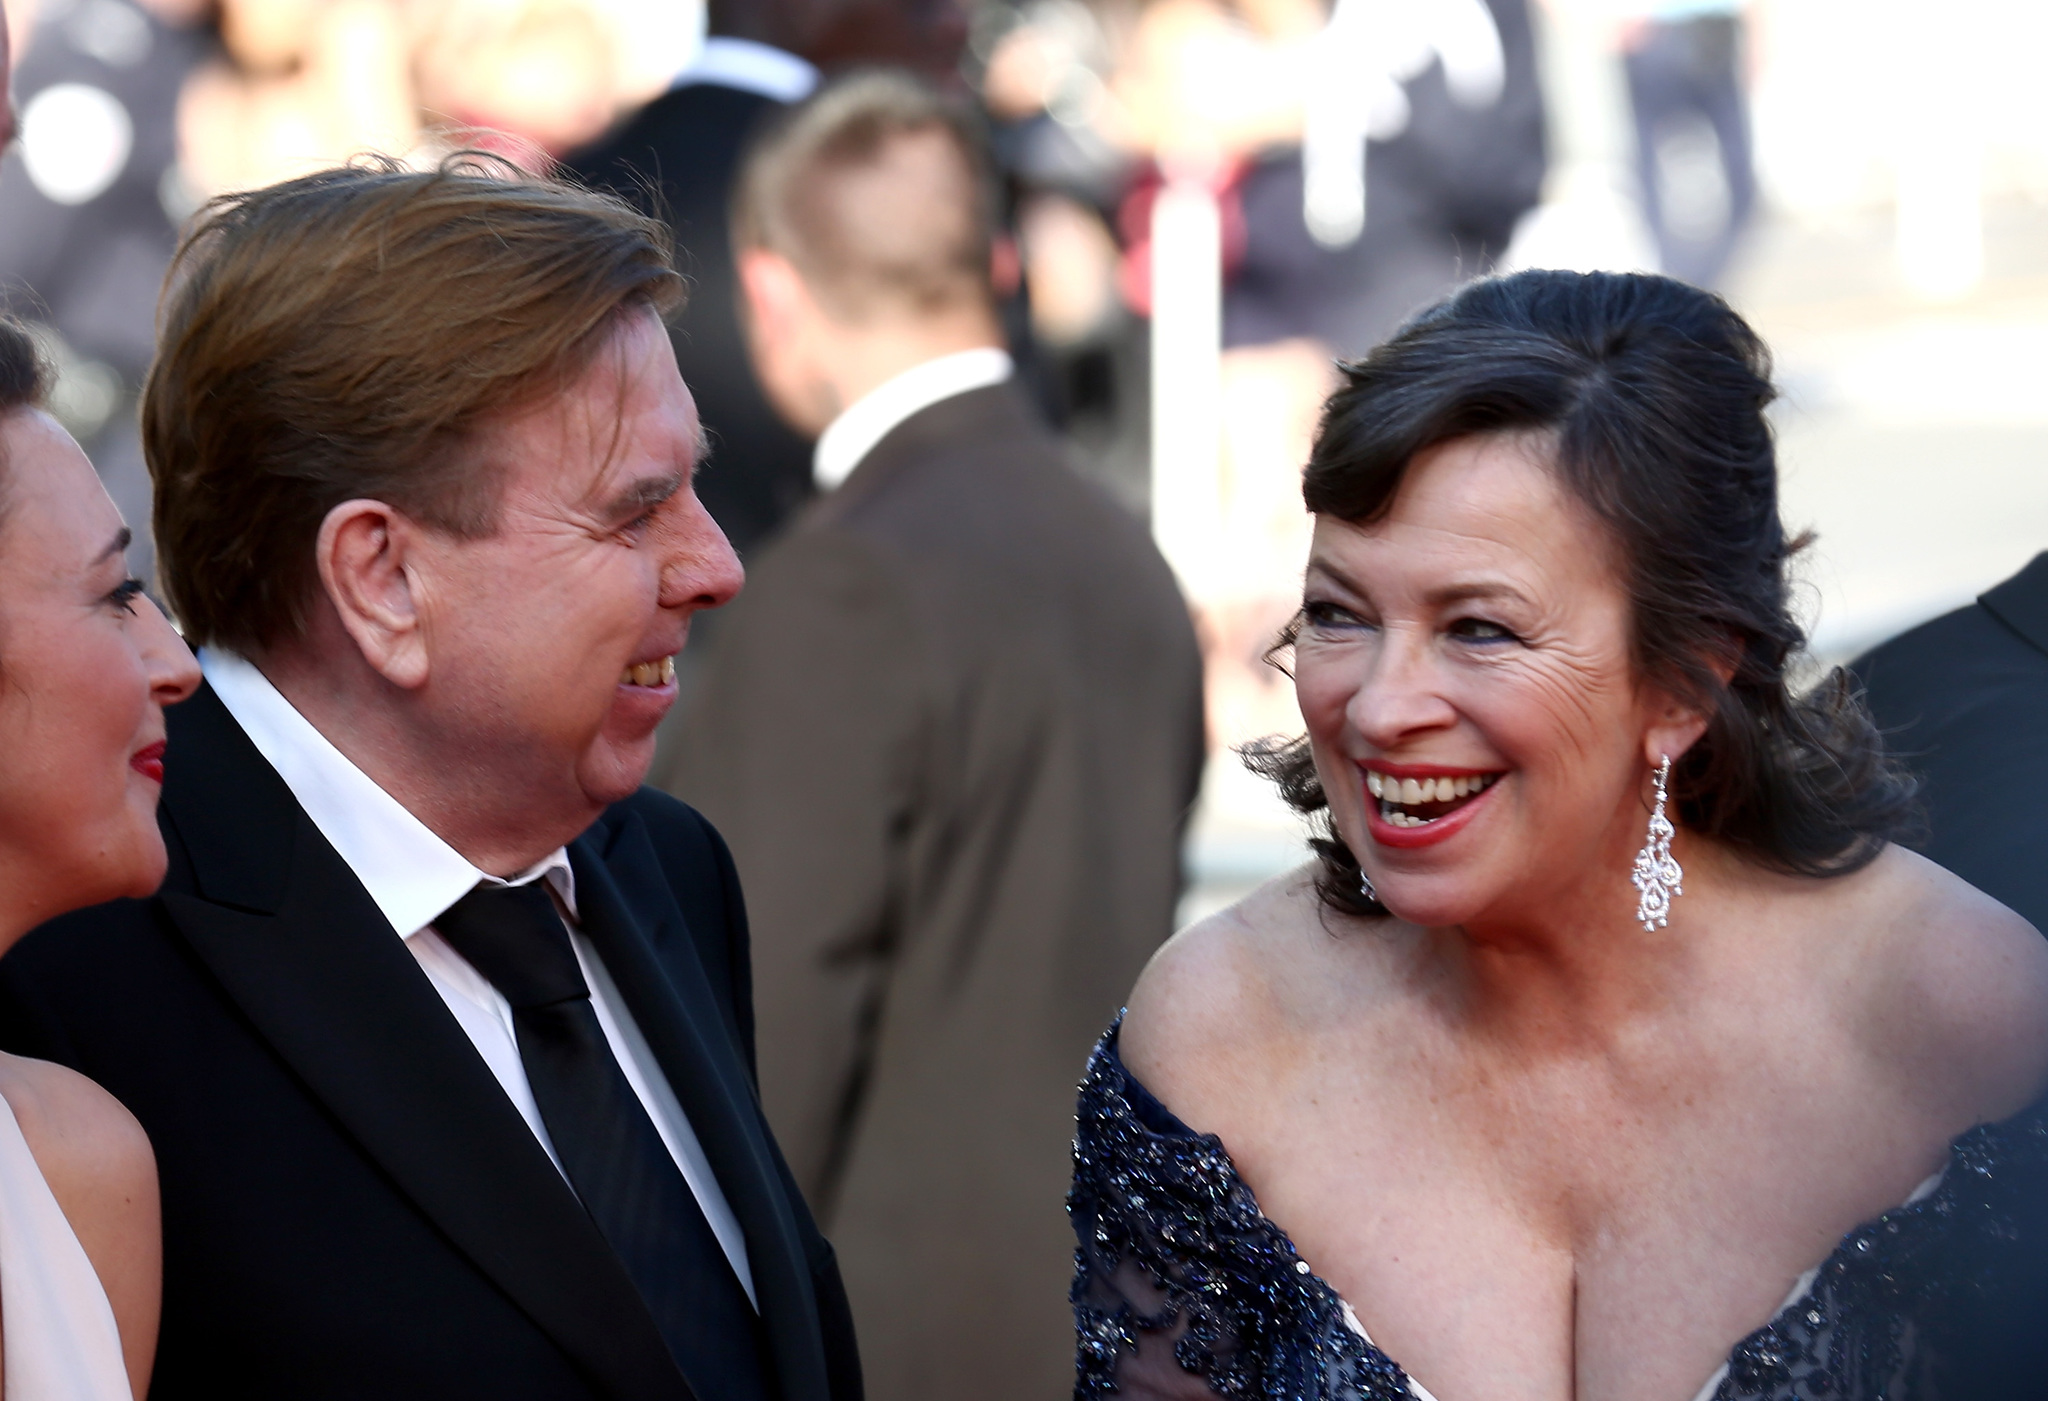 Timothy Spall and Marion Bailey at event of Mr. Turner (2014)